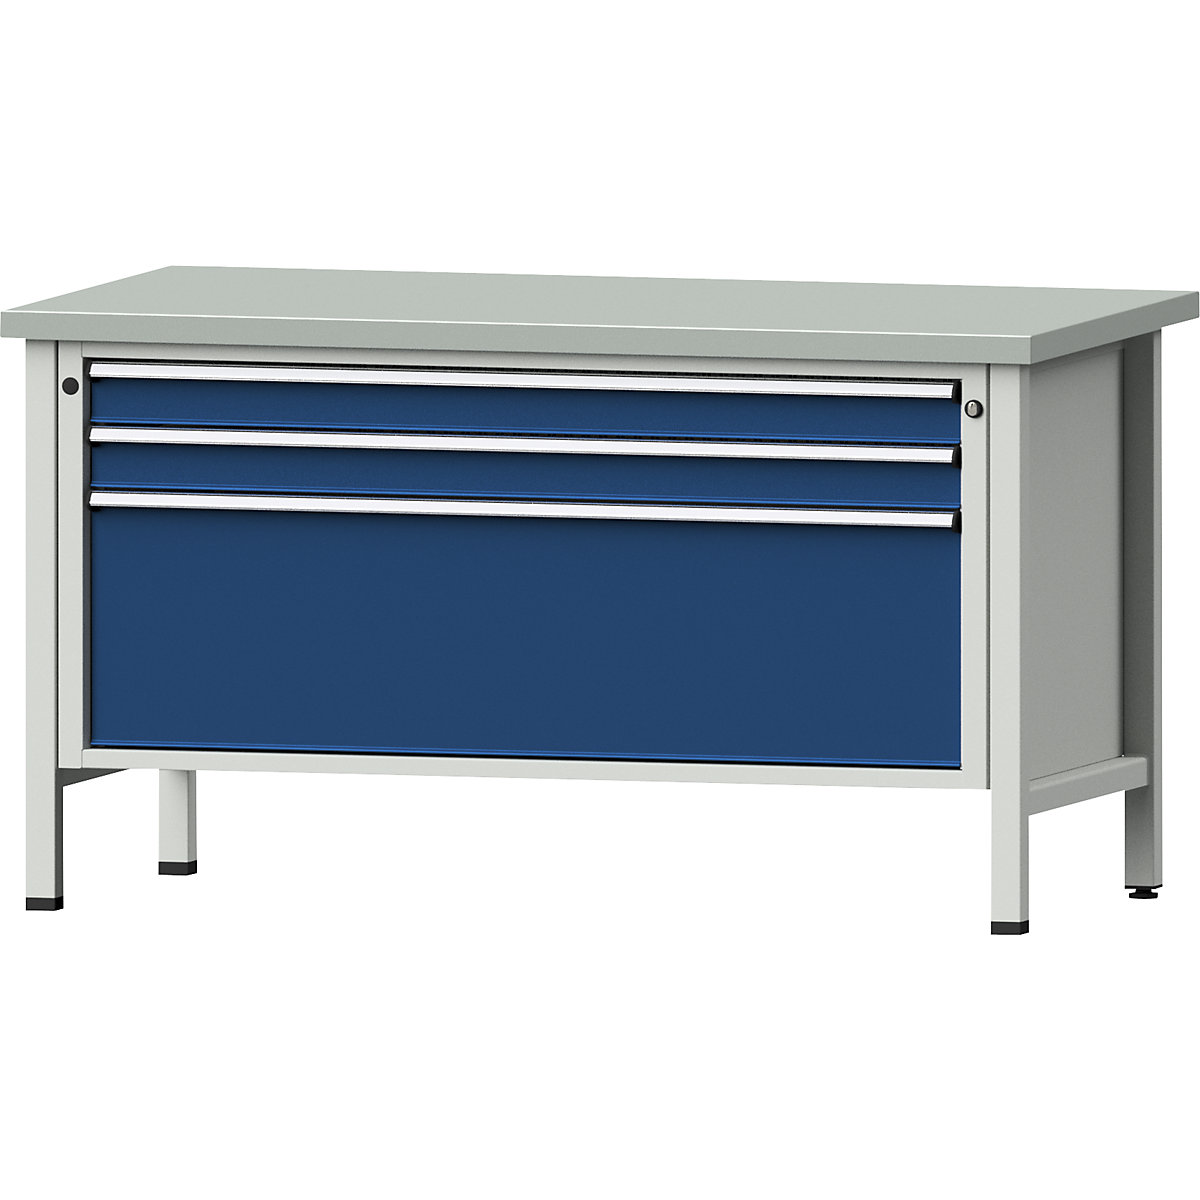 Workbench with XL/XXL drawers, frame construction – ANKE, width 1500 mm, 3 drawers, sheet steel covered worktop, front in gentian blue-13